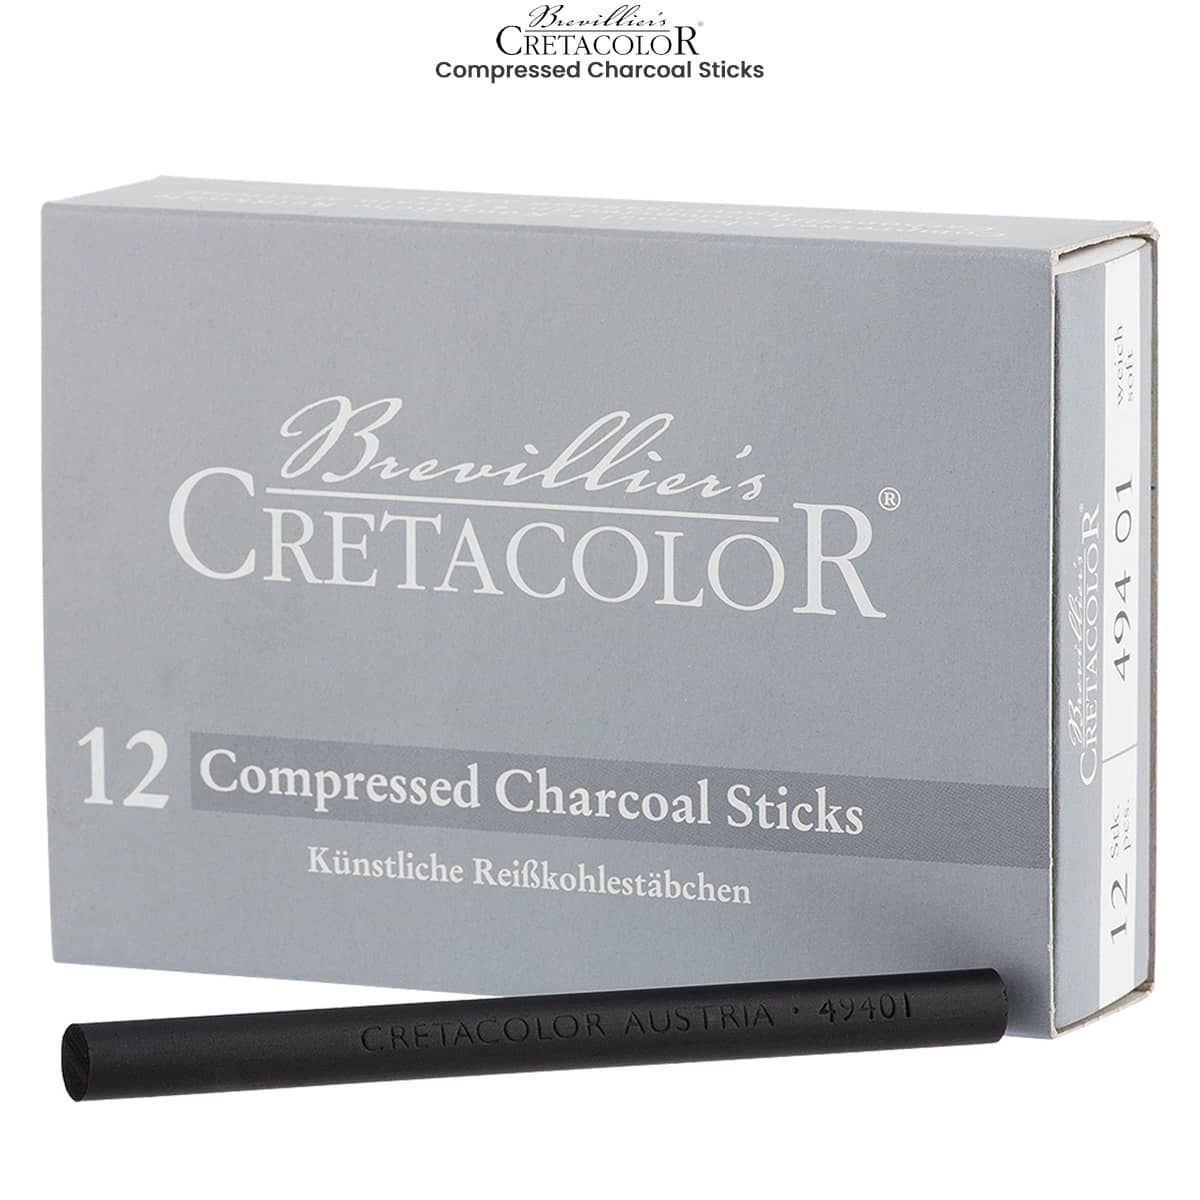 CRETACOLOR Charcoal Set 3 Count (Pack of 1)